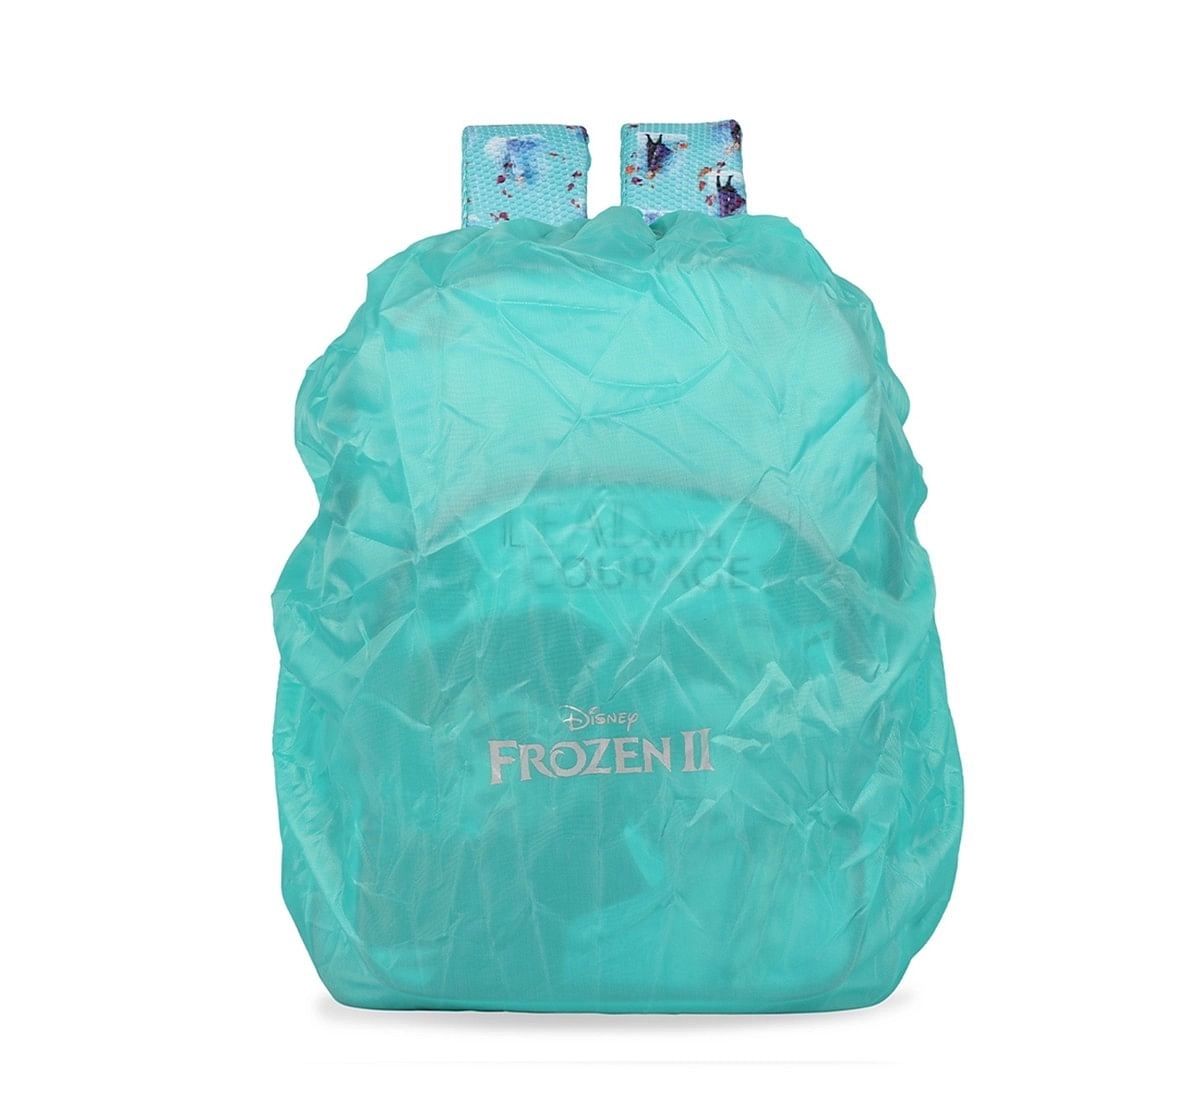 Disney Frozen2 Lead With Courage School Bag 36 Cm Bags for age 3Y+ (Turquoise)